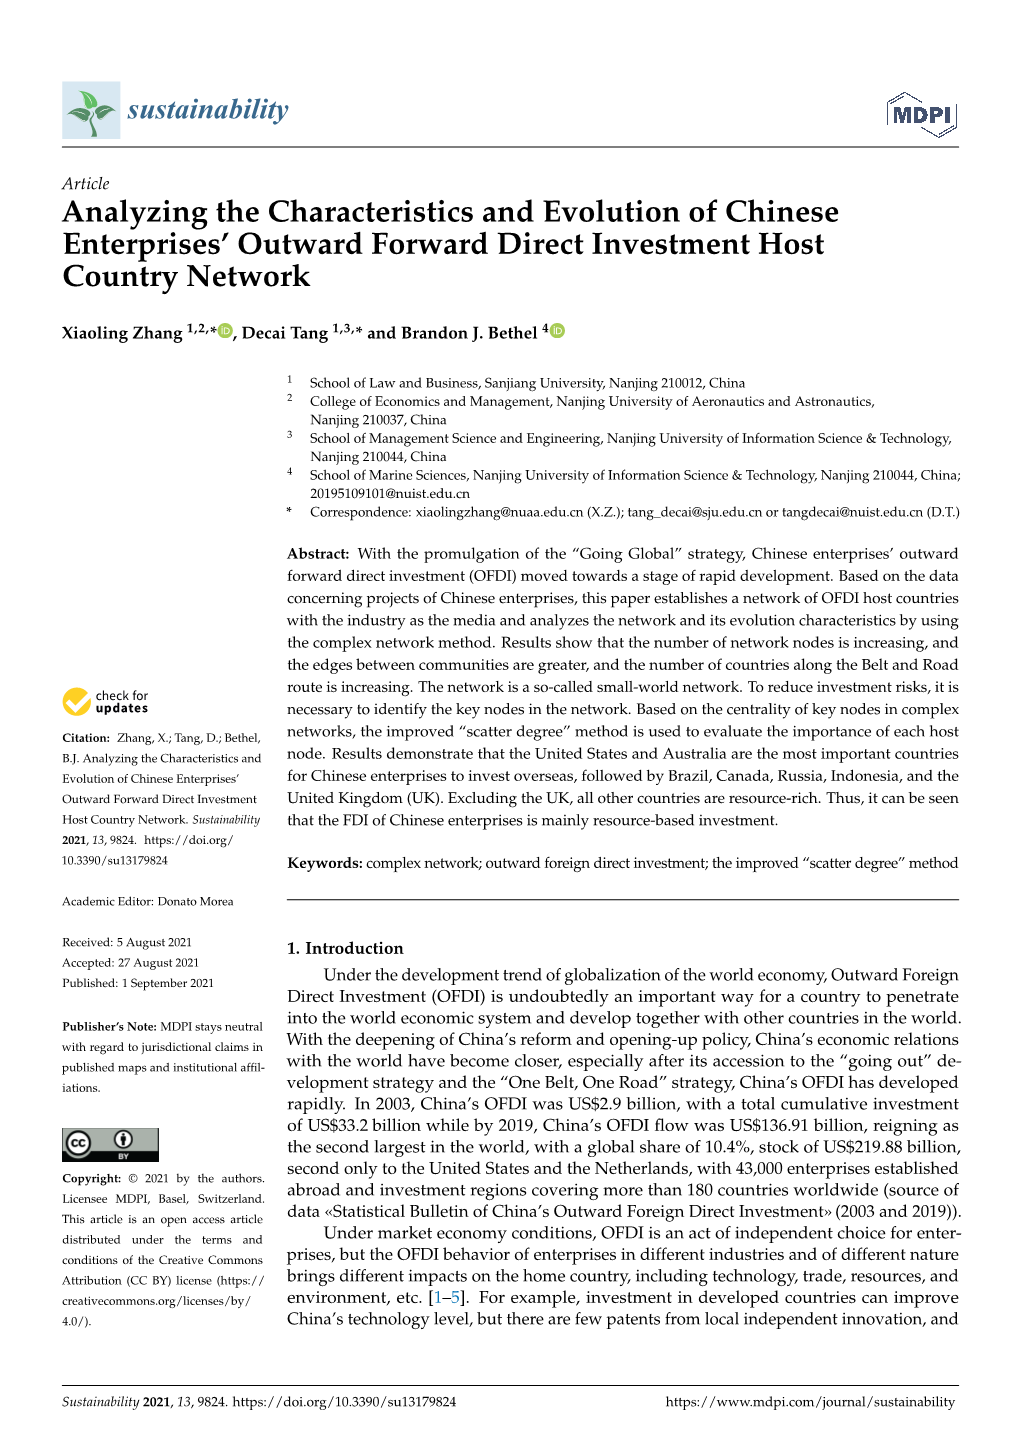 Analyzing the Characteristics and Evolution of Chinese Enterprises’ Outward Forward Direct Investment Host Country Network